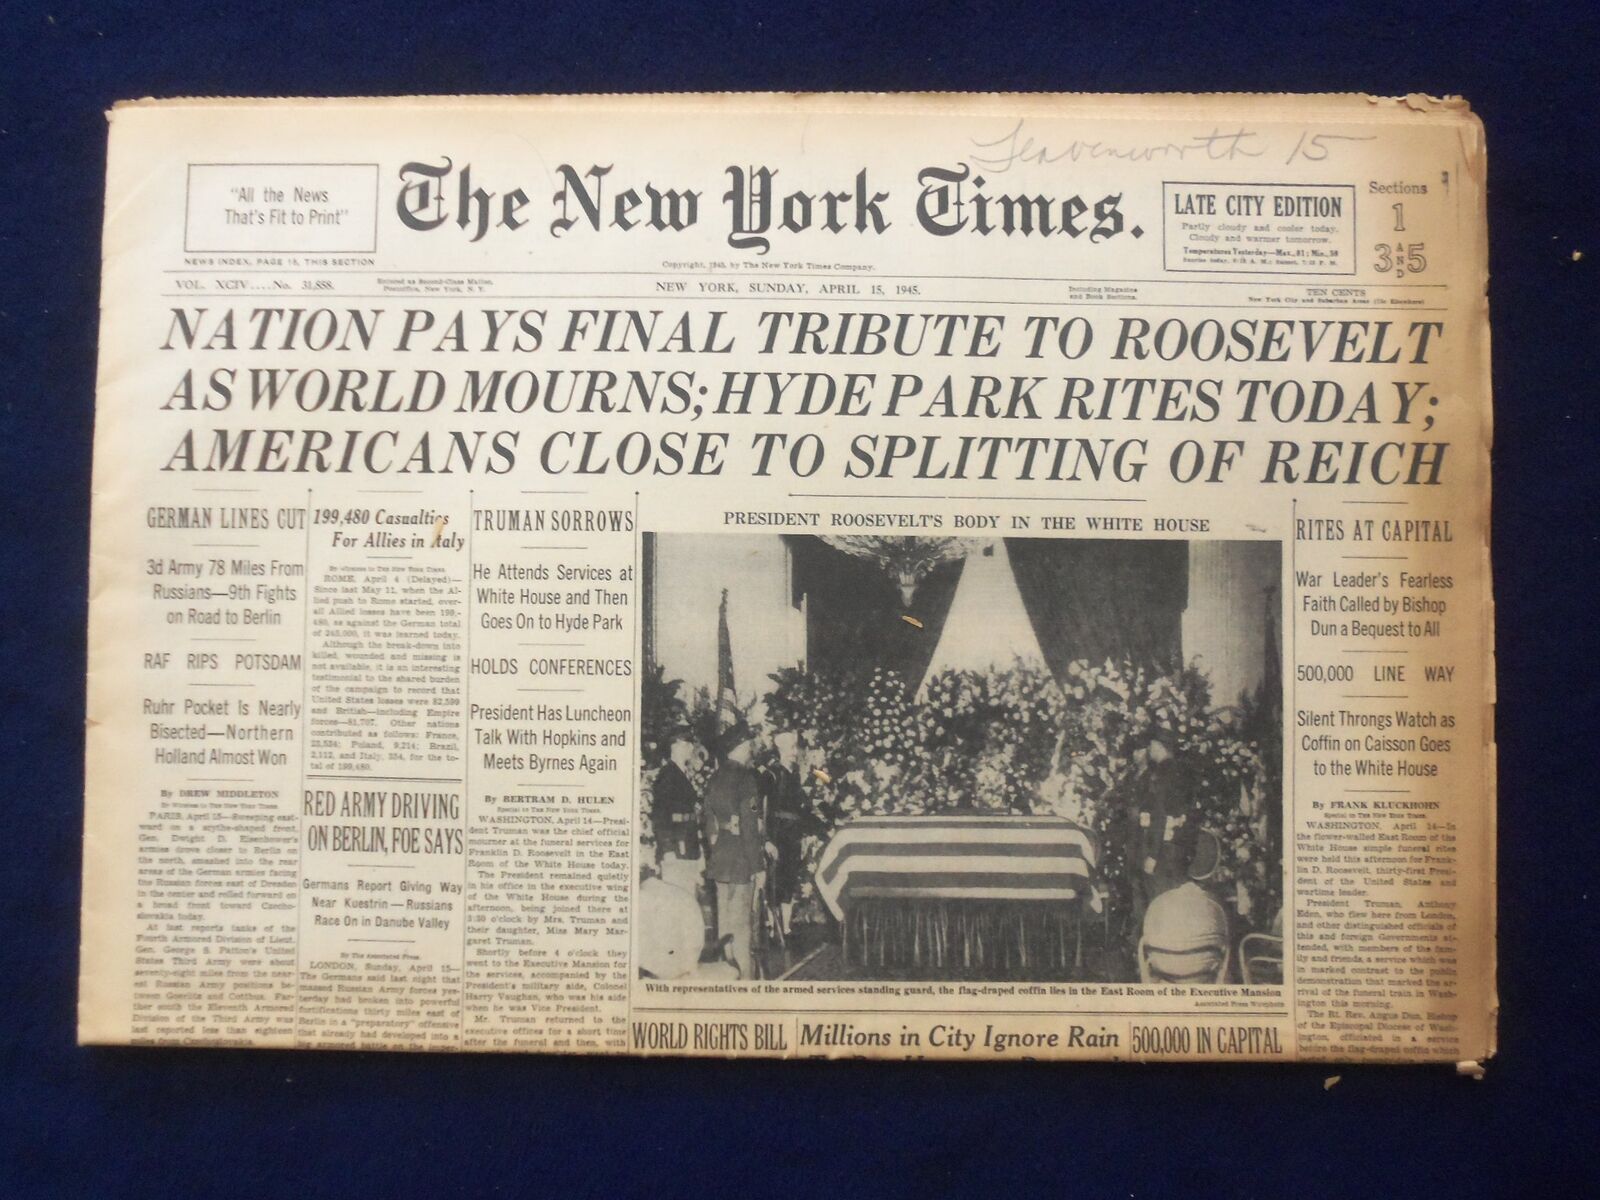 1945 APRIL 15 NEW YORK TIMES - NATION PAYS FINAL TRIBUTE TO ROOSEVELT - NP 6468